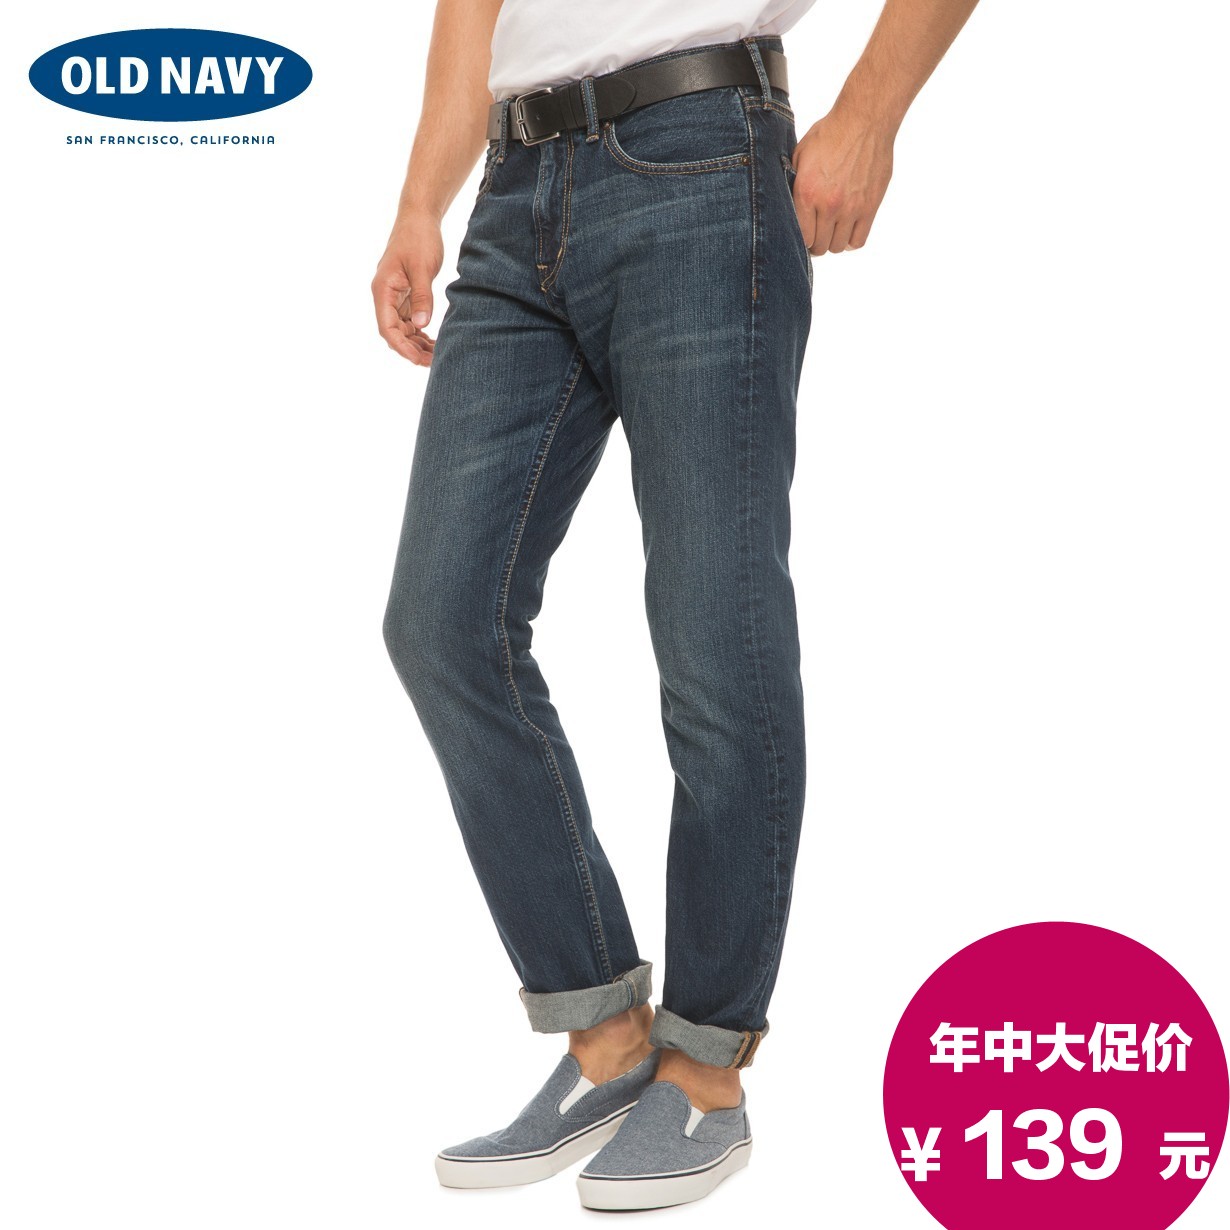   OLD NAVY